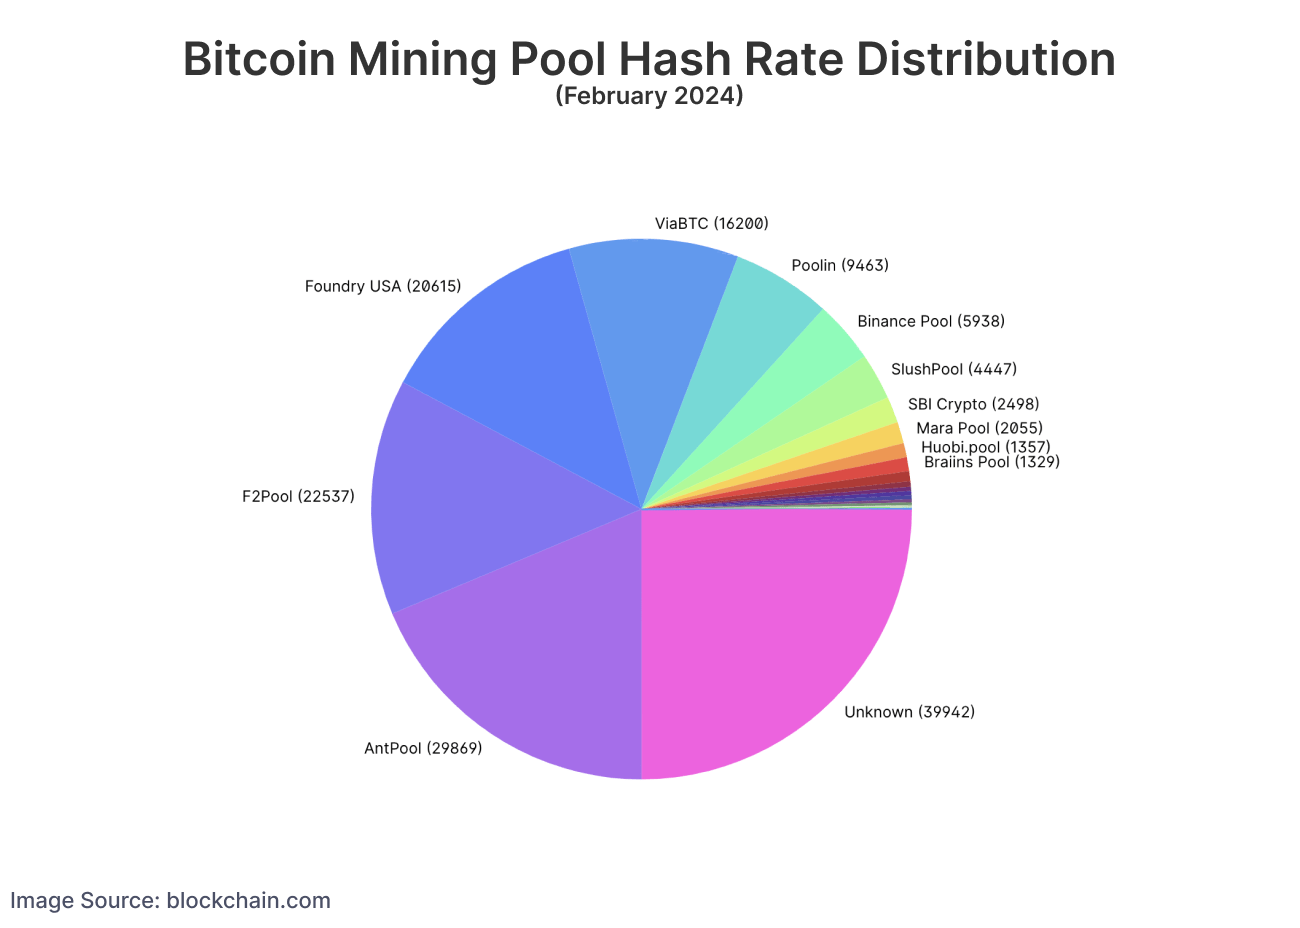 A pie chart showing the hash rate distribution among Bitcoin mining pools in February 2024, with Foundry USA, F2Pool, and AntPool having the largest shares.